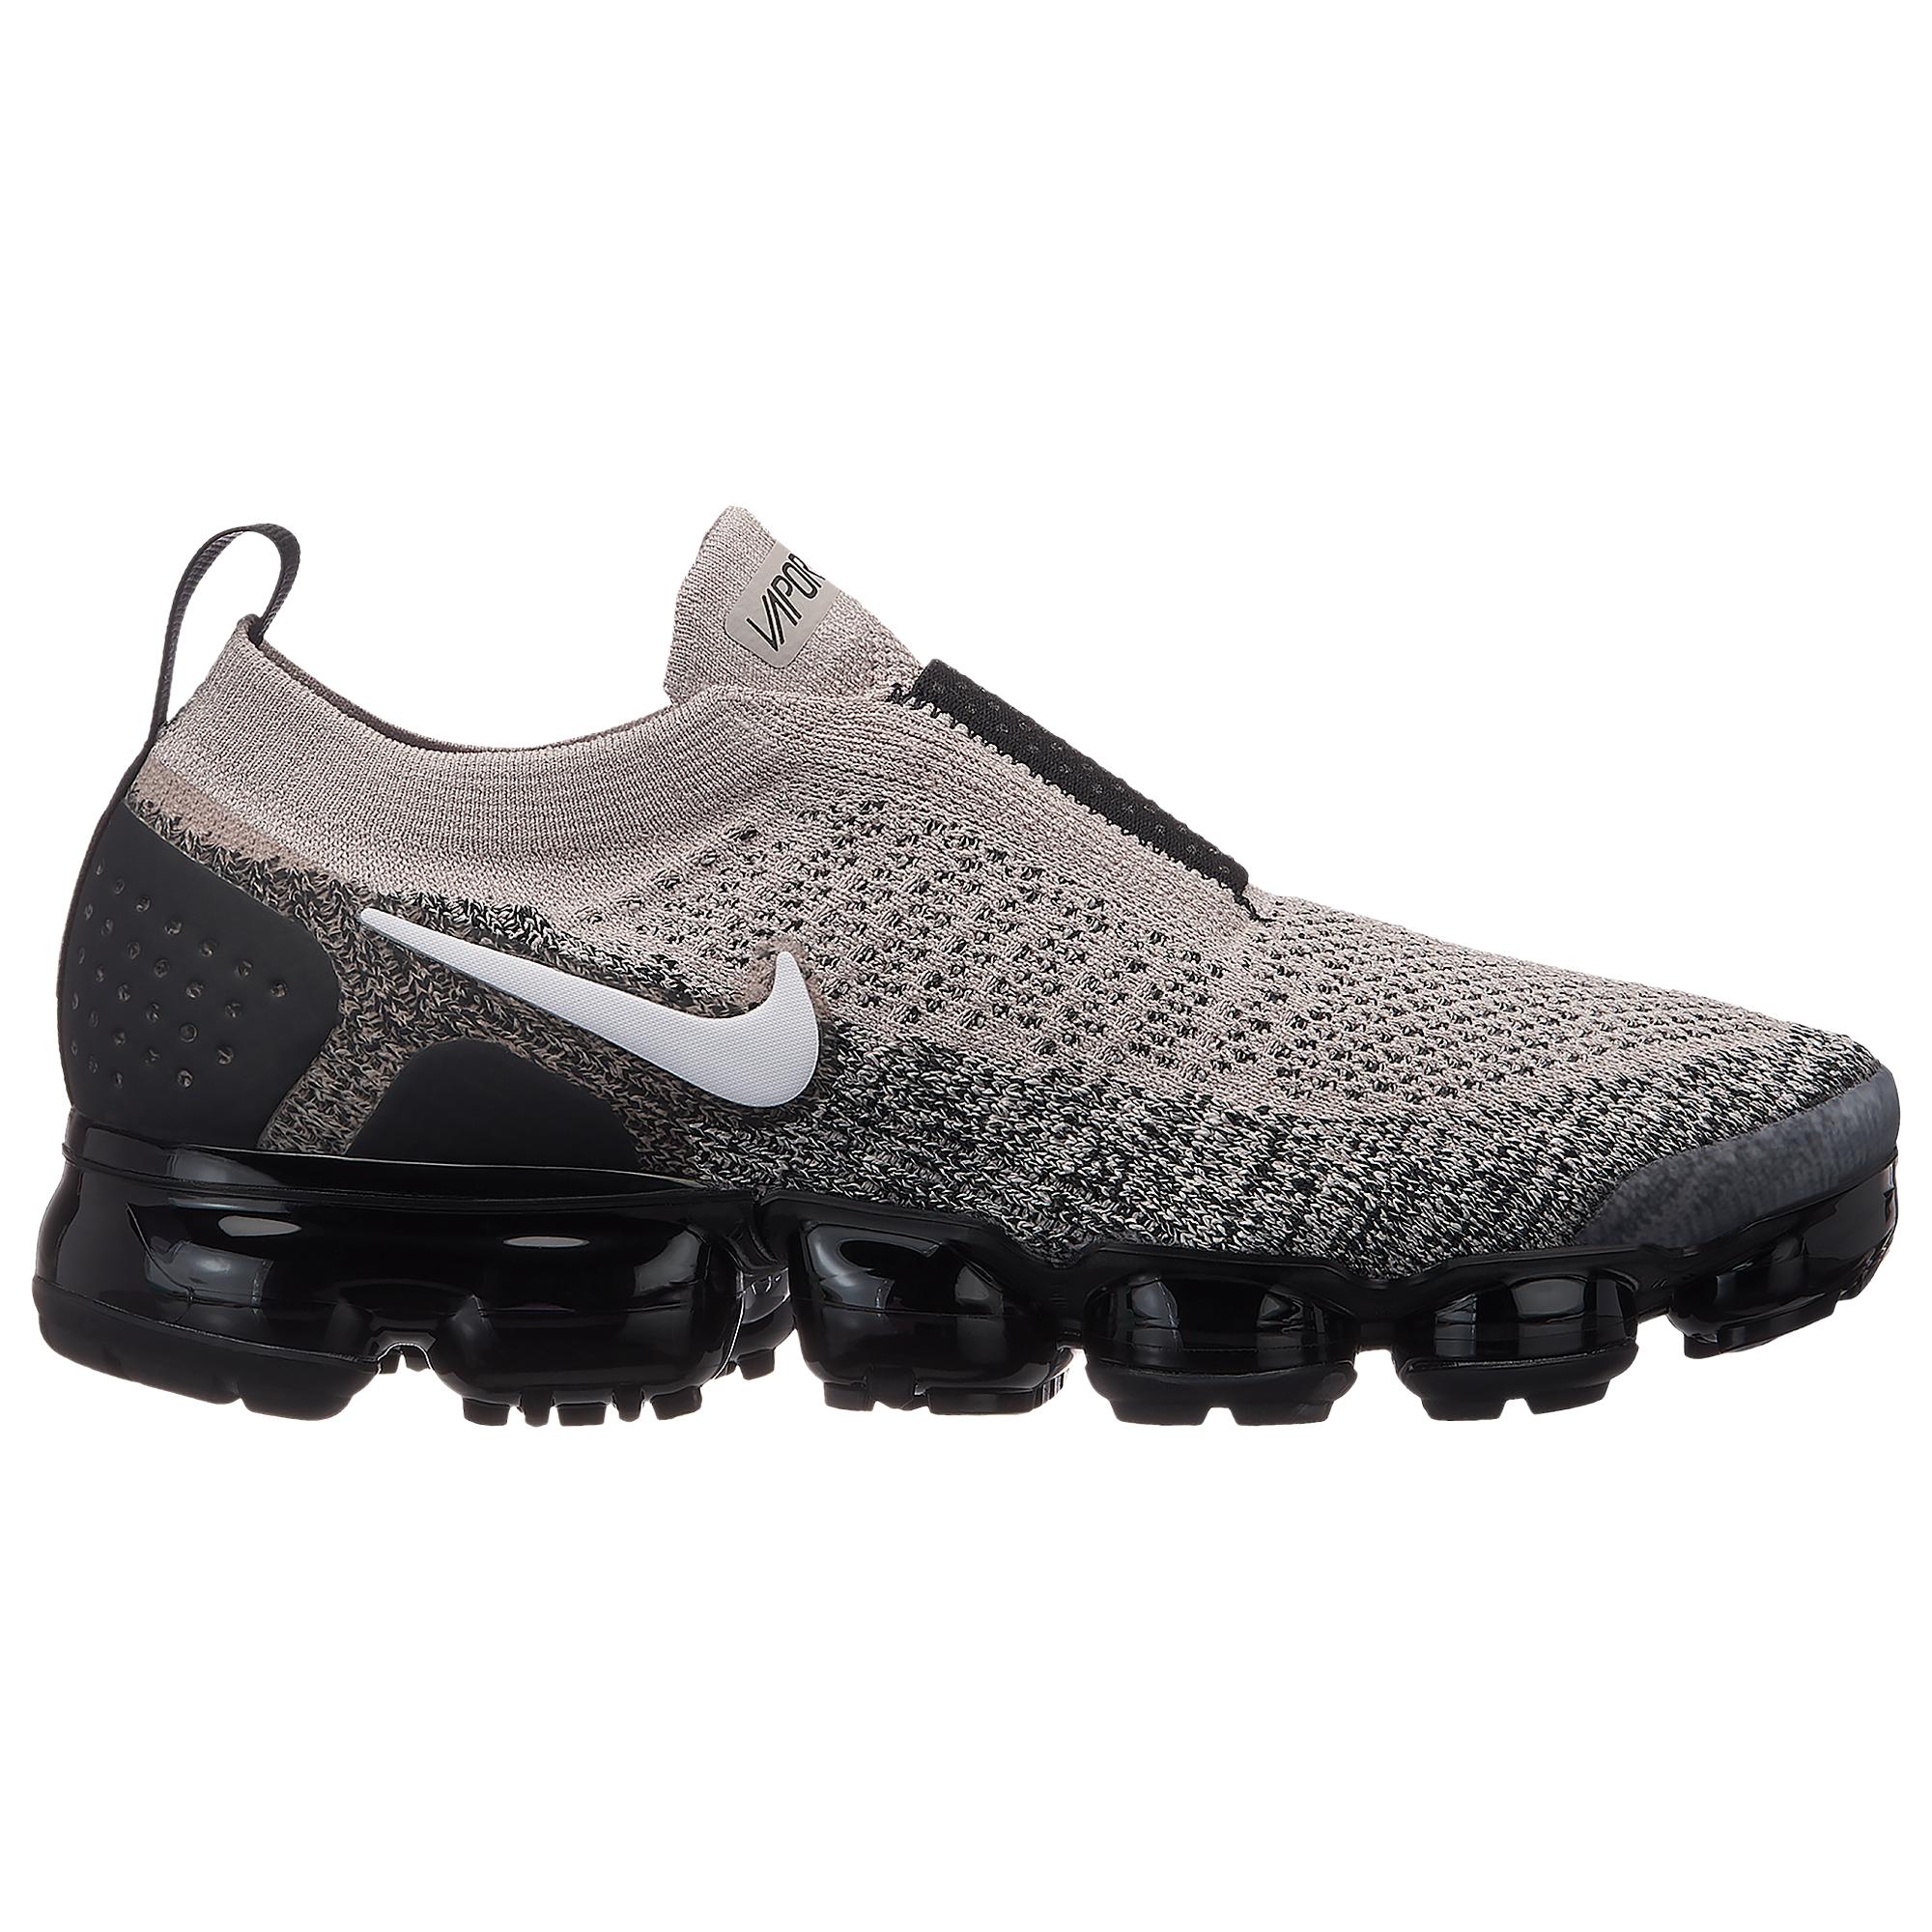 Nike Air Vapormax Moc 2 Moon Particle (w) in Black - Lyst